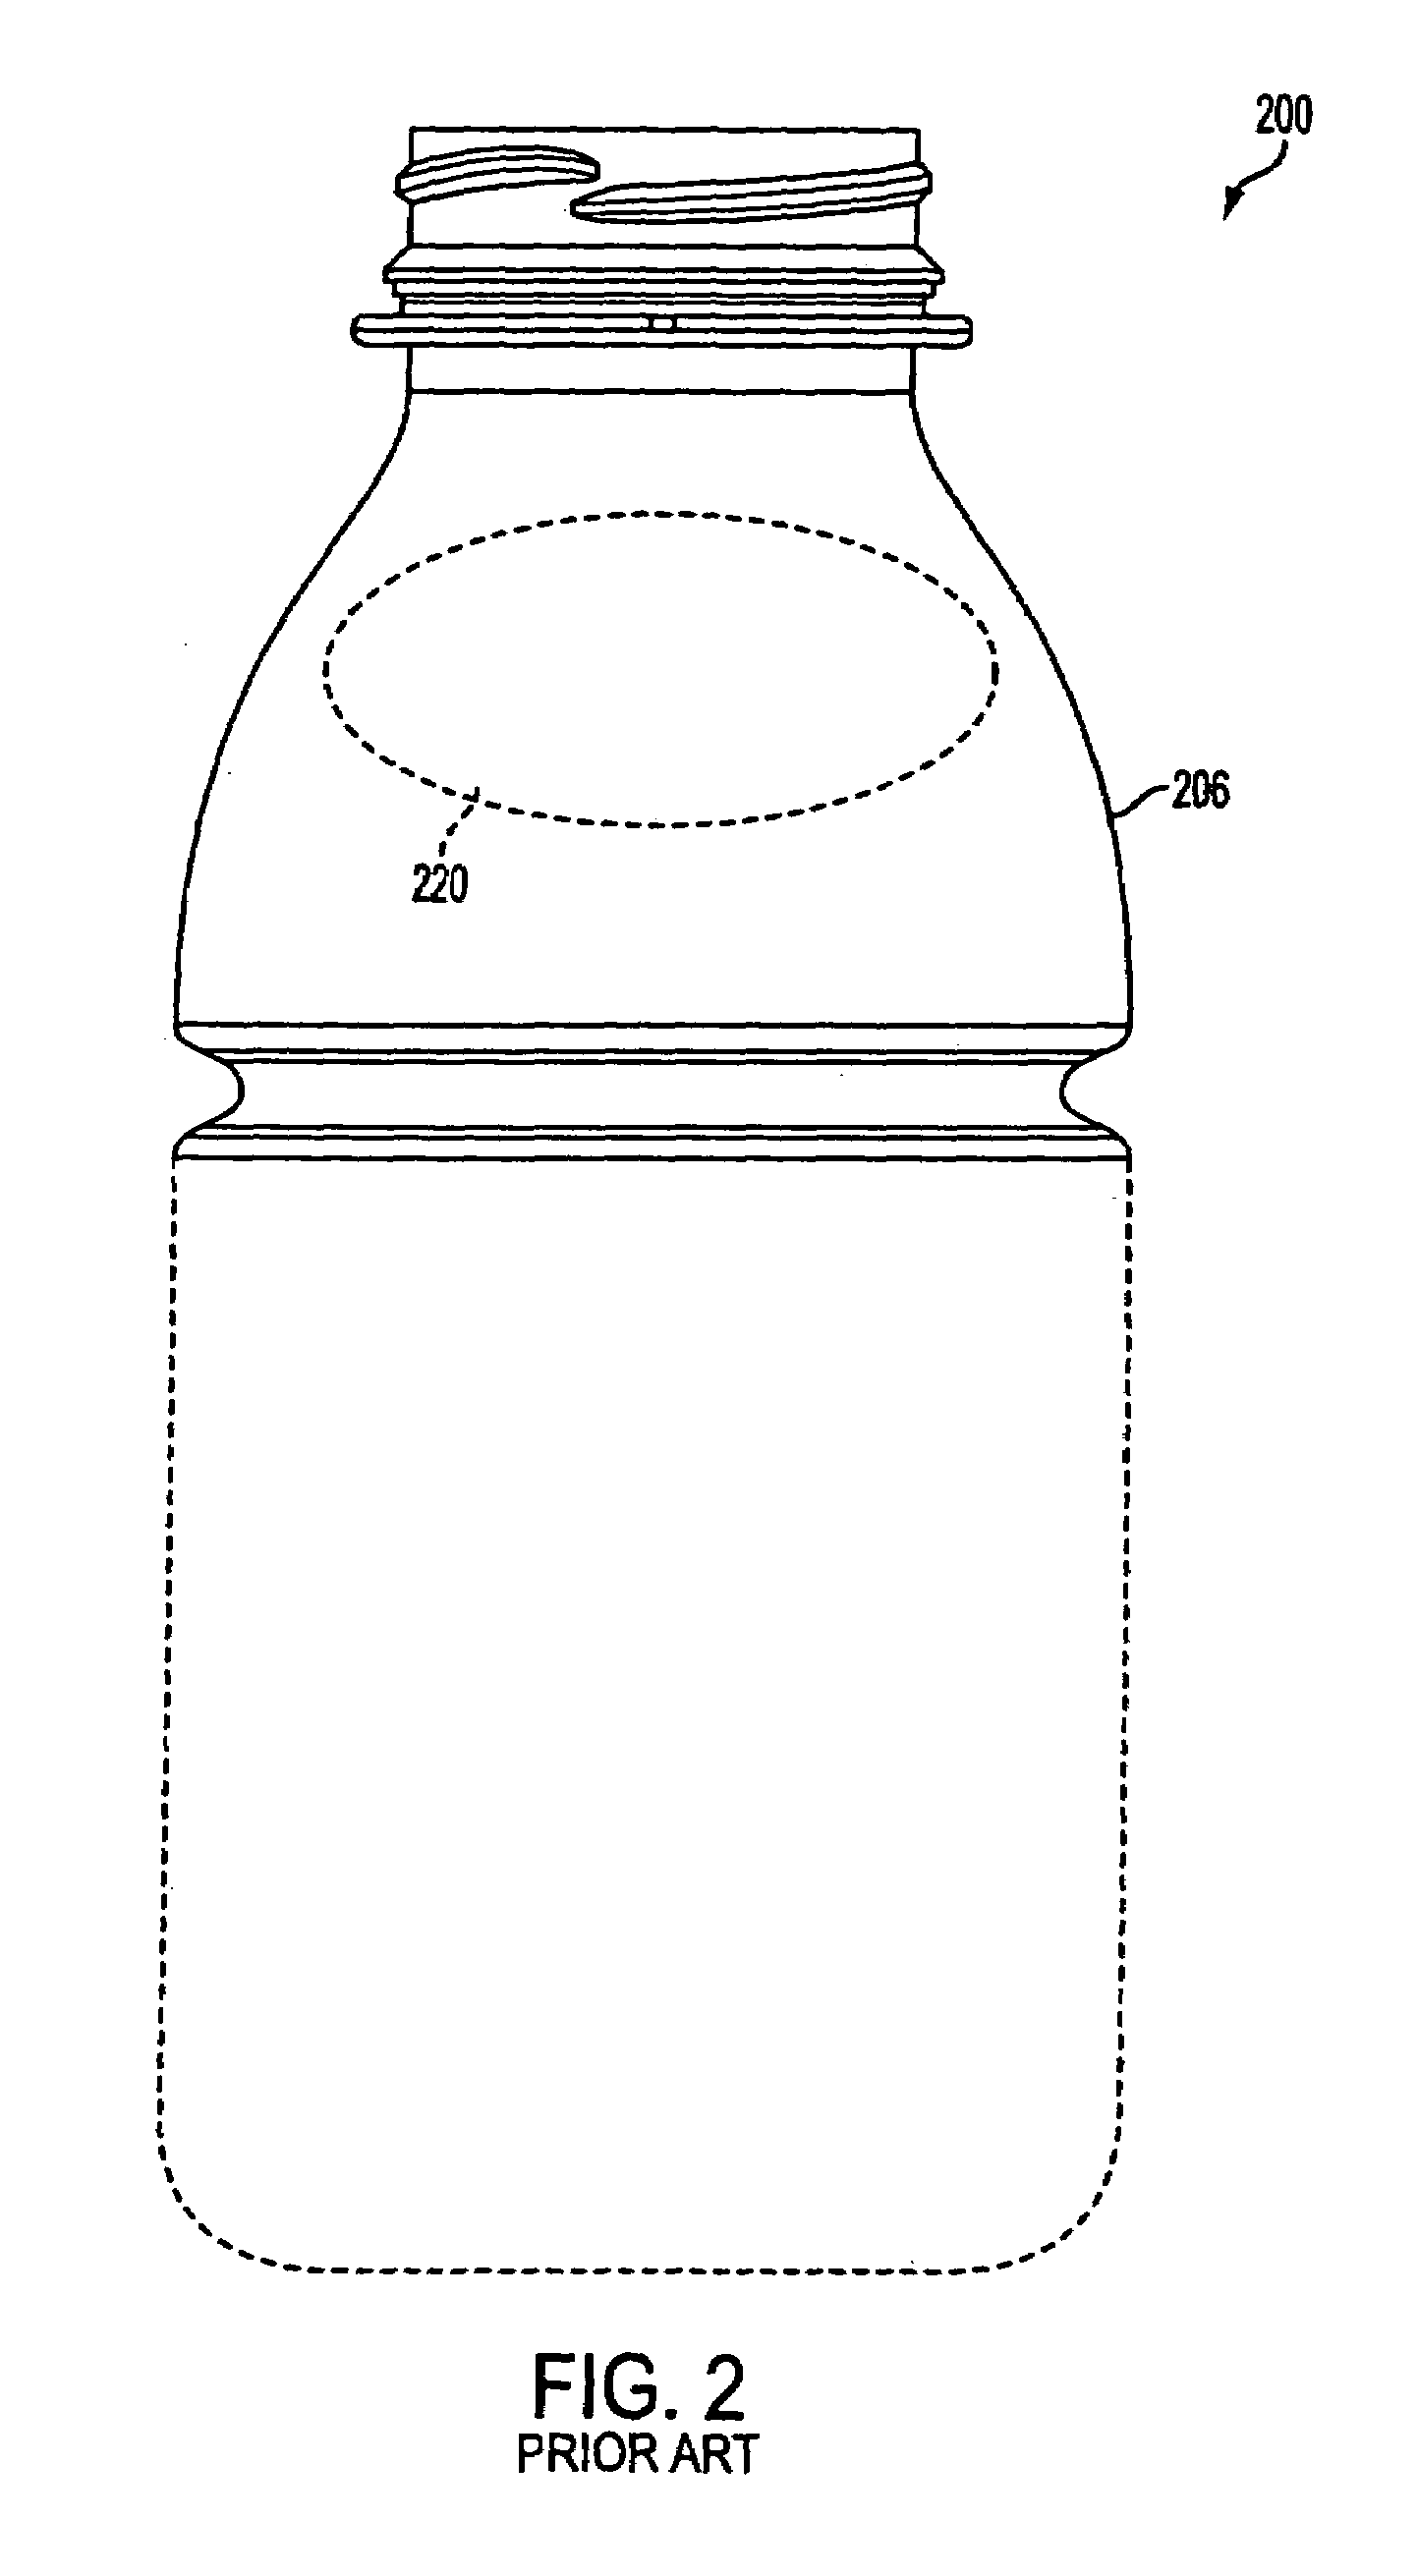 Hot-fillable container with a waisted dome